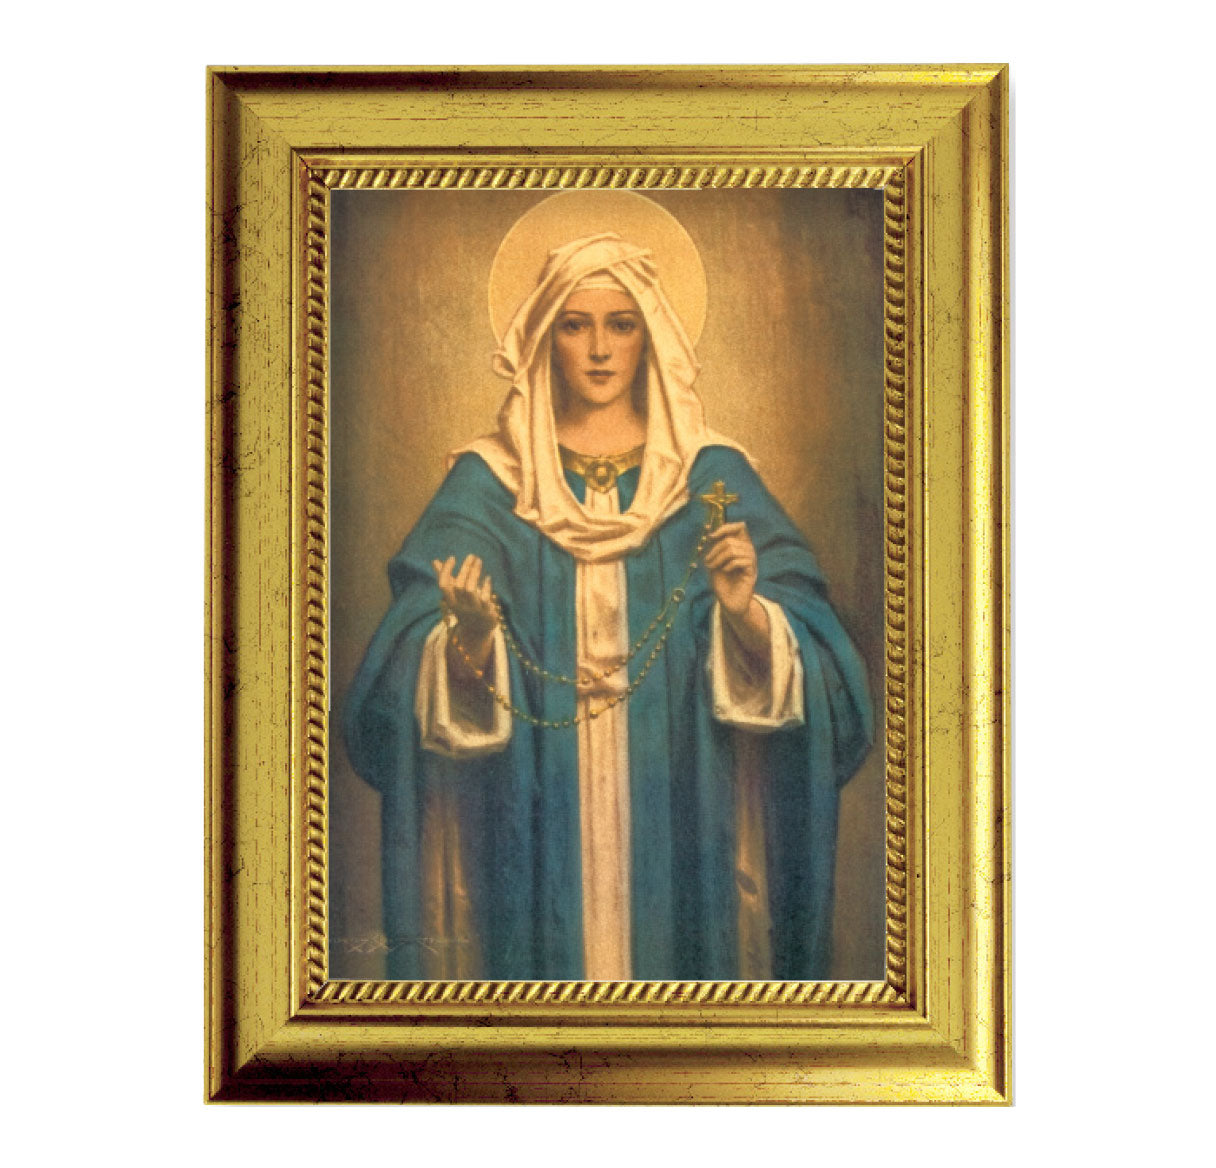 Our Lady of the Rosary Gold-Leaf Framed Art